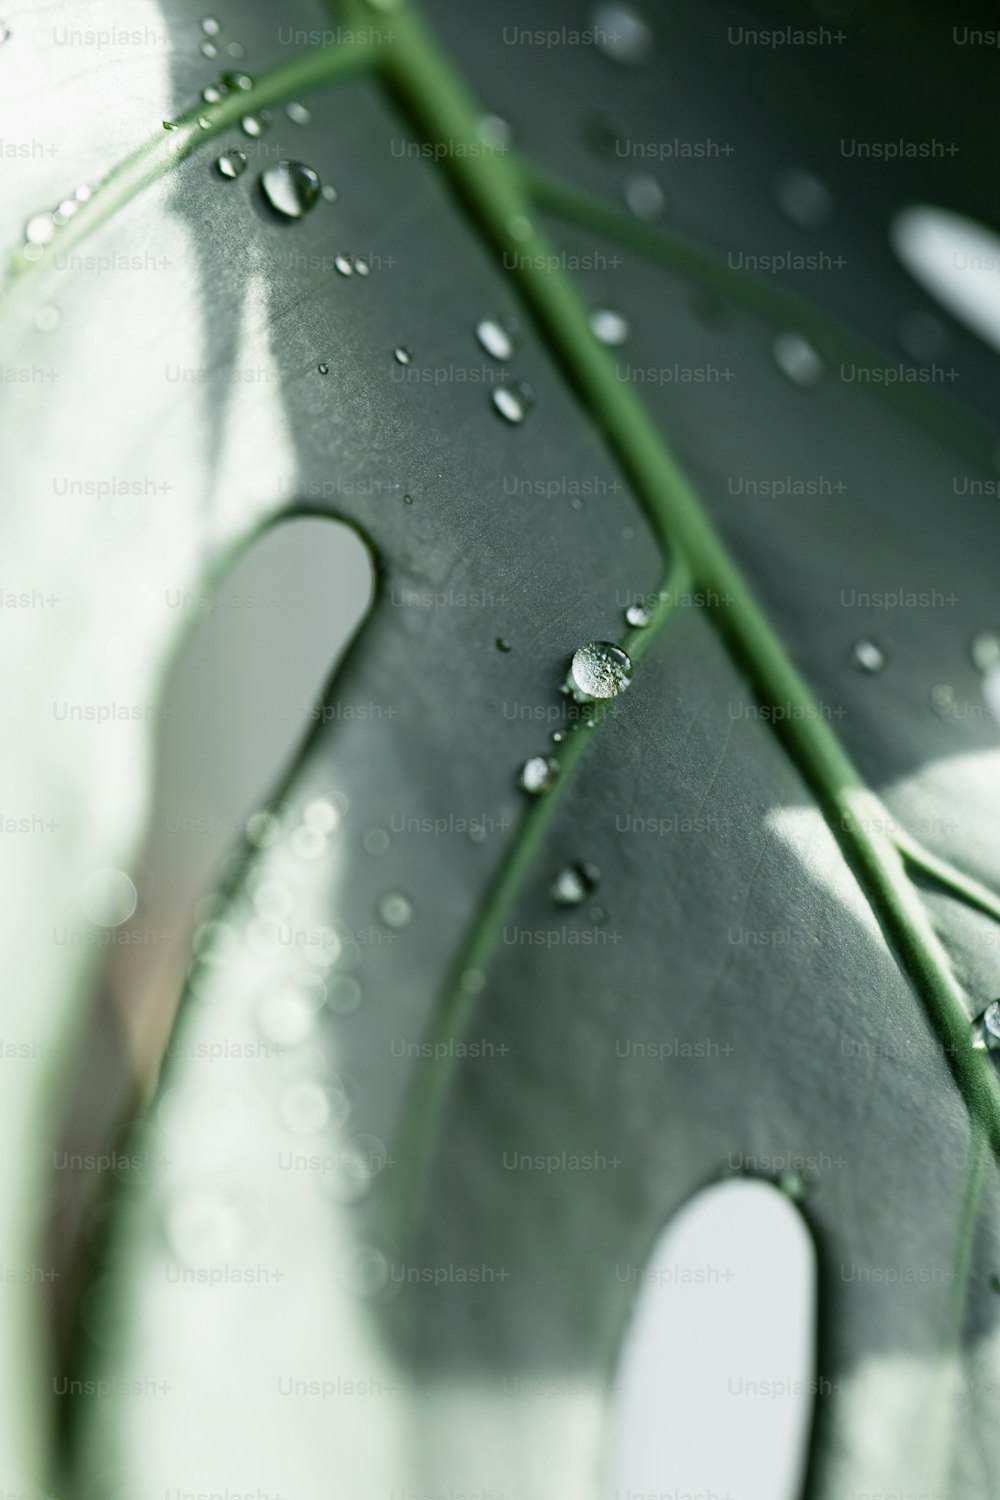 1000+ Water Droplets On A Leaf Pictures | Download Free Images on ...